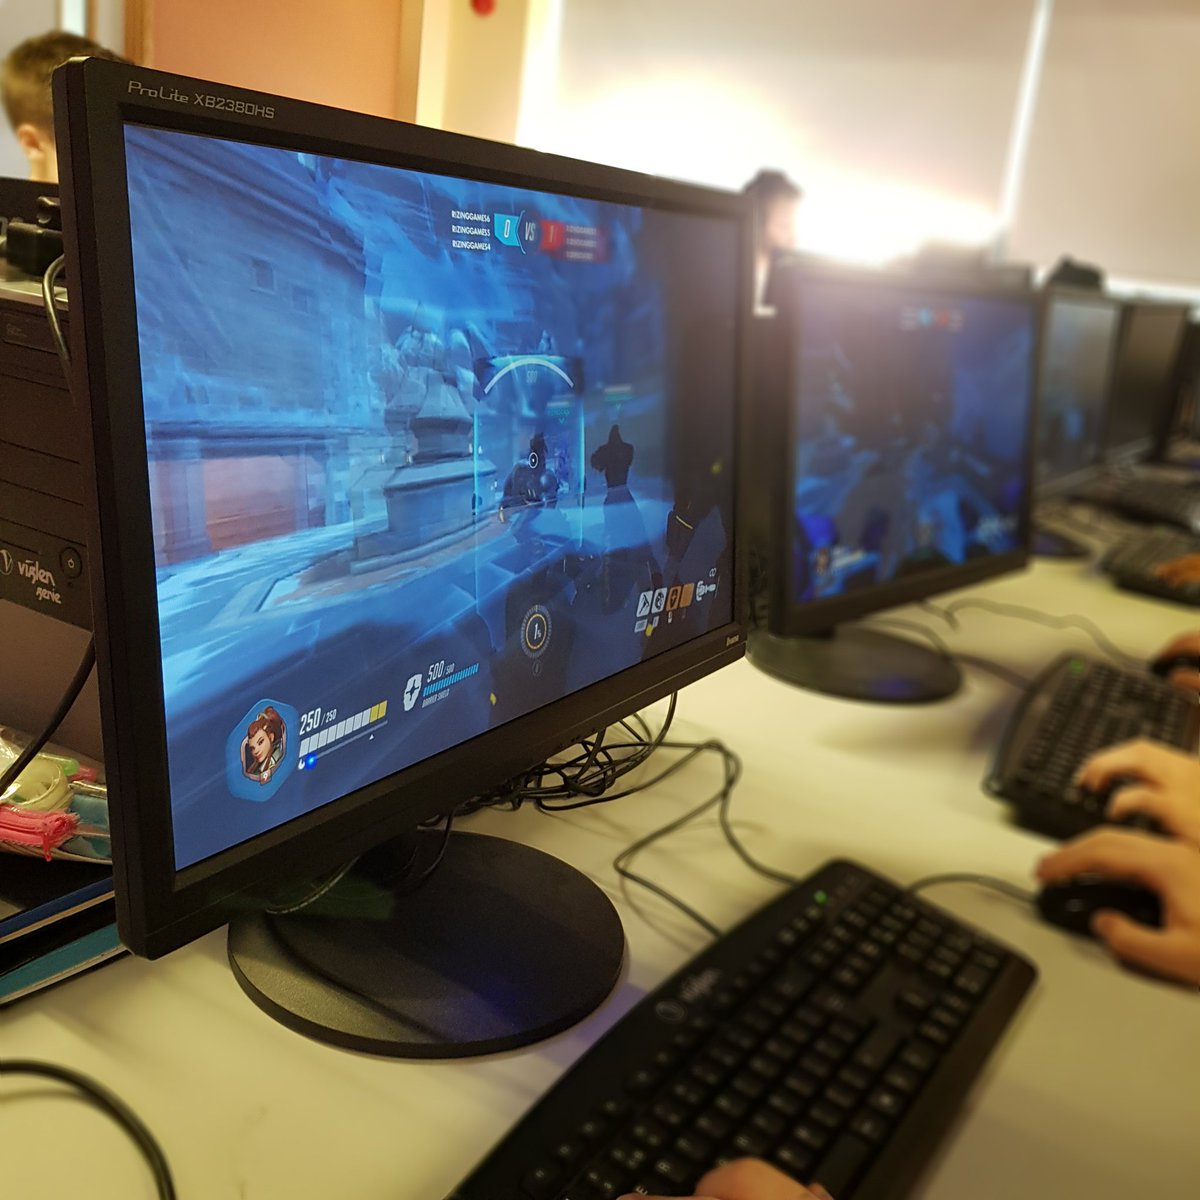 First match of the #DSHesports tournament 2019 here @RizingGamesUK! Can't wait to see how this year turns out 🕹🎮🏆#DSHplay #esports #overwatch @DigSchoolhouse @CRC_College